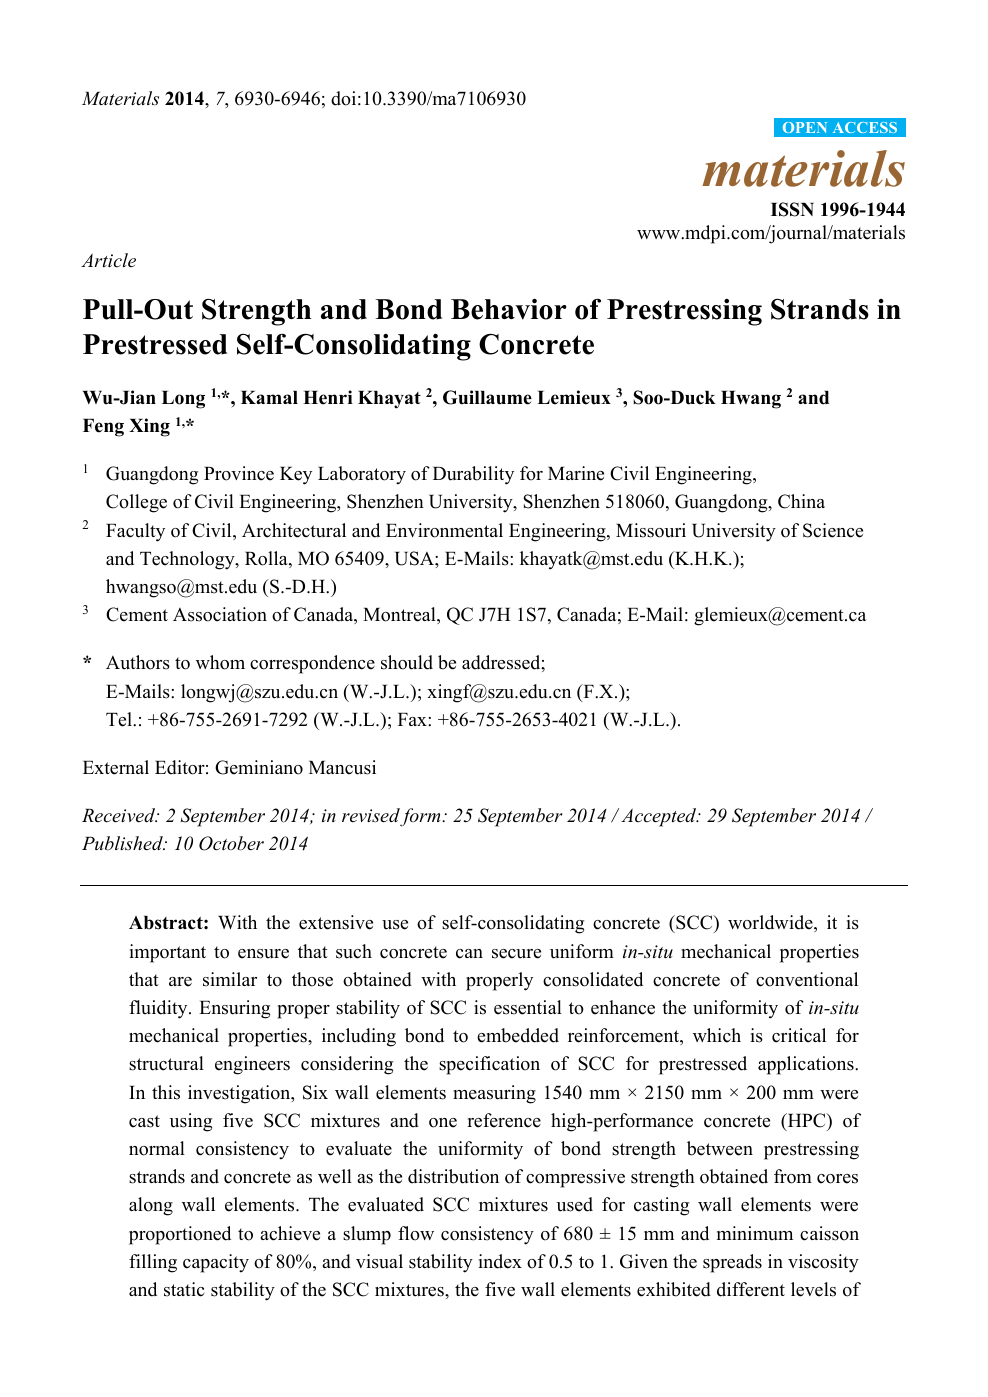 Pull Out Strength And Bond Behavior Of Prestressing Strands In Prestressed Self Consolidating Concrete Topic Of Research Paper In Civil Engineering Download Scholarly Article Pdf And Read For Free On Cyberleninka Open Science